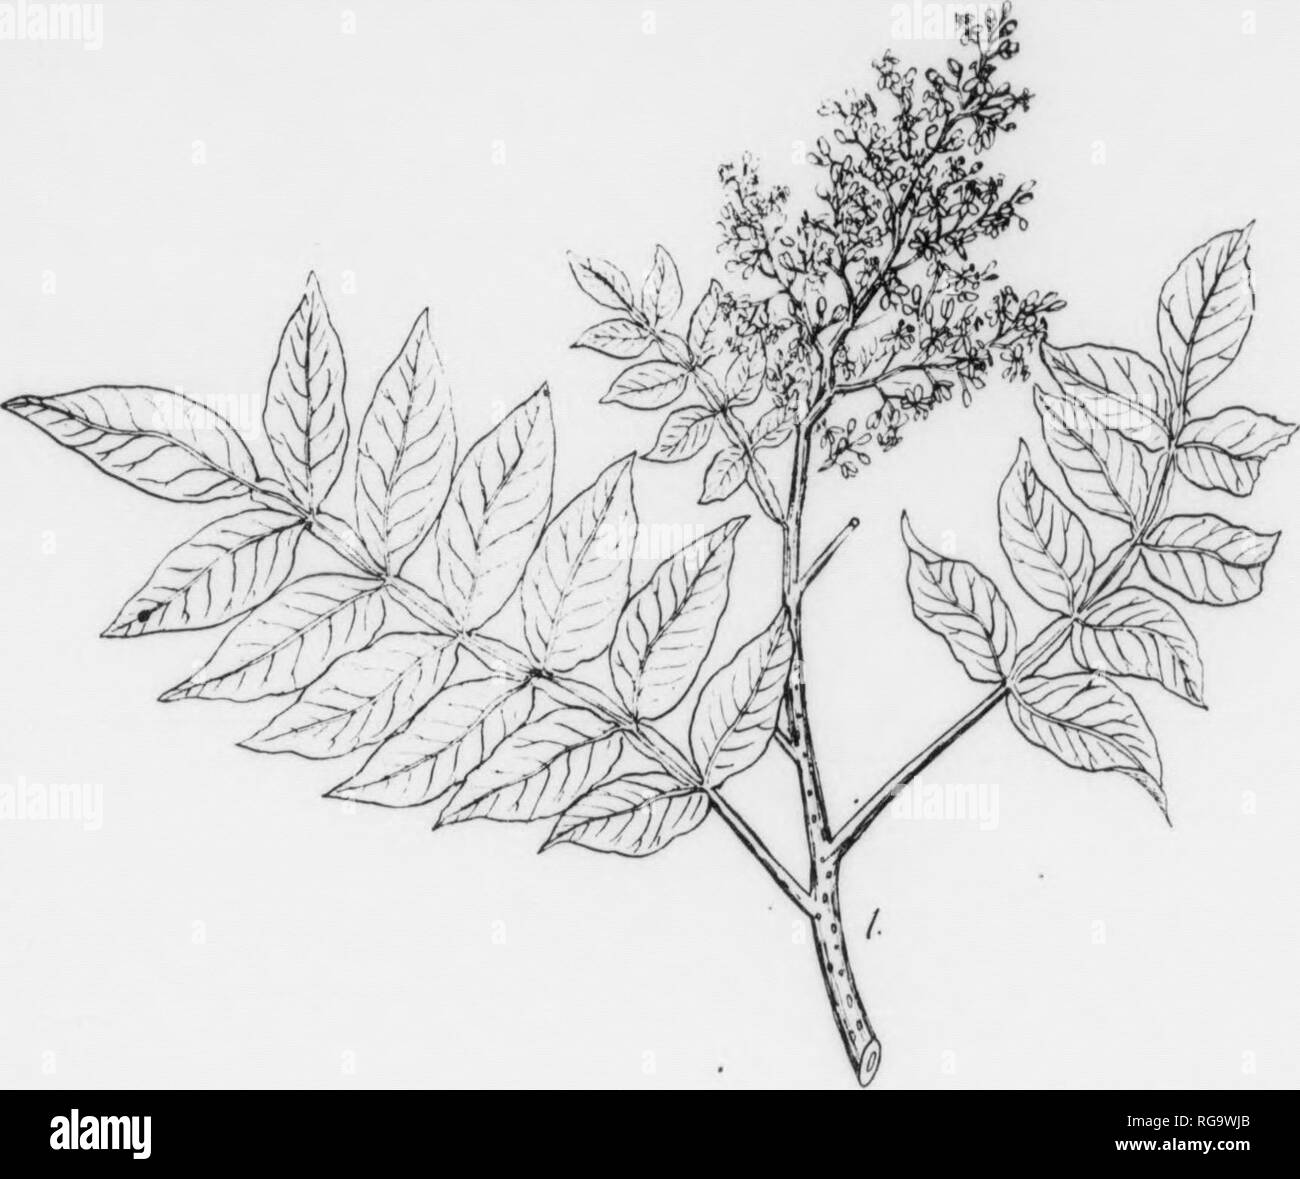 . Bulletin (Pennsylvania Department of Forestry), no. 11. Forests and forestry. 192 DWARF SUMACH Rhus copallina, Linnaeus FORM—A small shrub rarely more than 6-8 ft. tall; becomes a tree only in Arkansas and Texas. BARK—Rather thin, liifht to ree distinguished from our other native species of sumach by its winged leaf-petioles and its leaflets which are entire-margined except near the apex. Its branches contain a watery juice while the branches of the Staghom and Smooth Sumach contain a mJlky juice. Its branches are roughened by conspicuous raised lentlcels while those of the Smooth Sumac are  Stock Photo